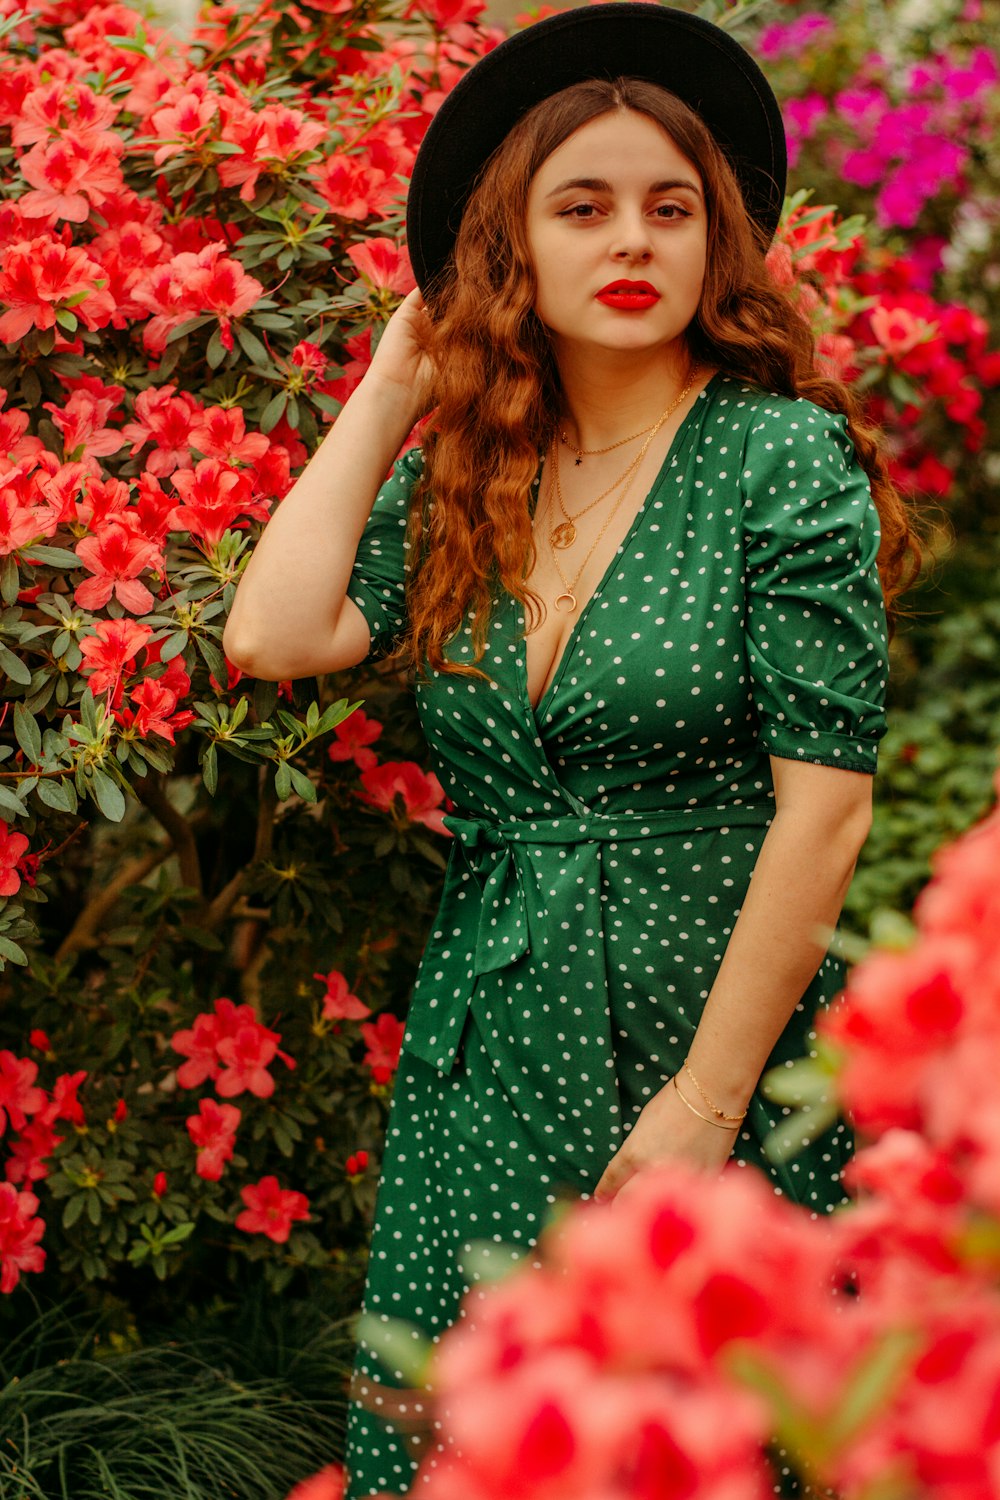 a woman in a green dress and black hat standing in front of red flowers